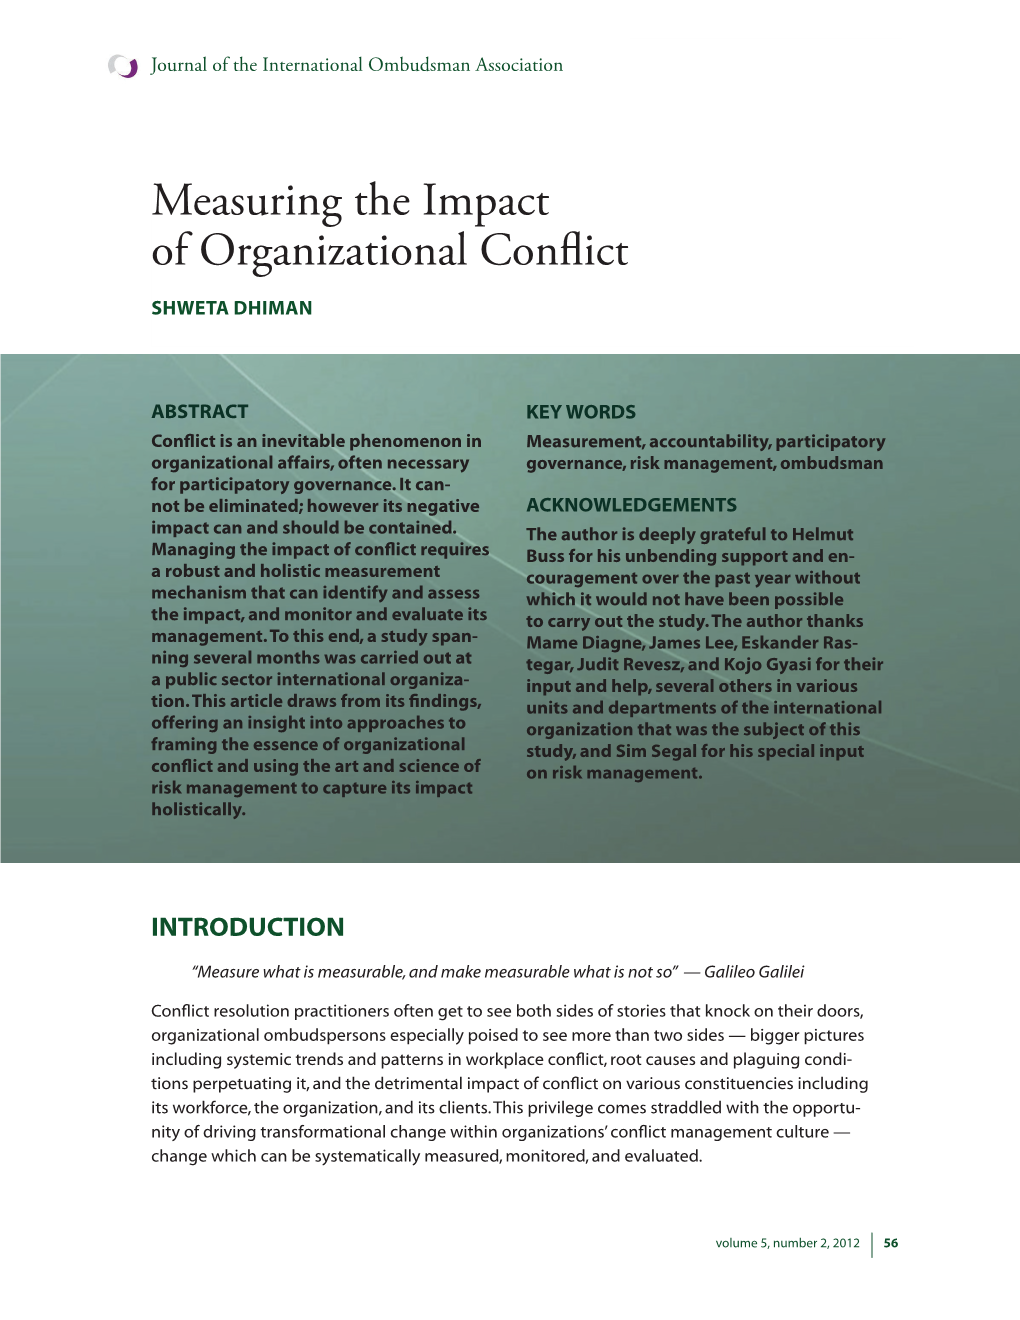 Measuring the Impact of Organizational Conflict